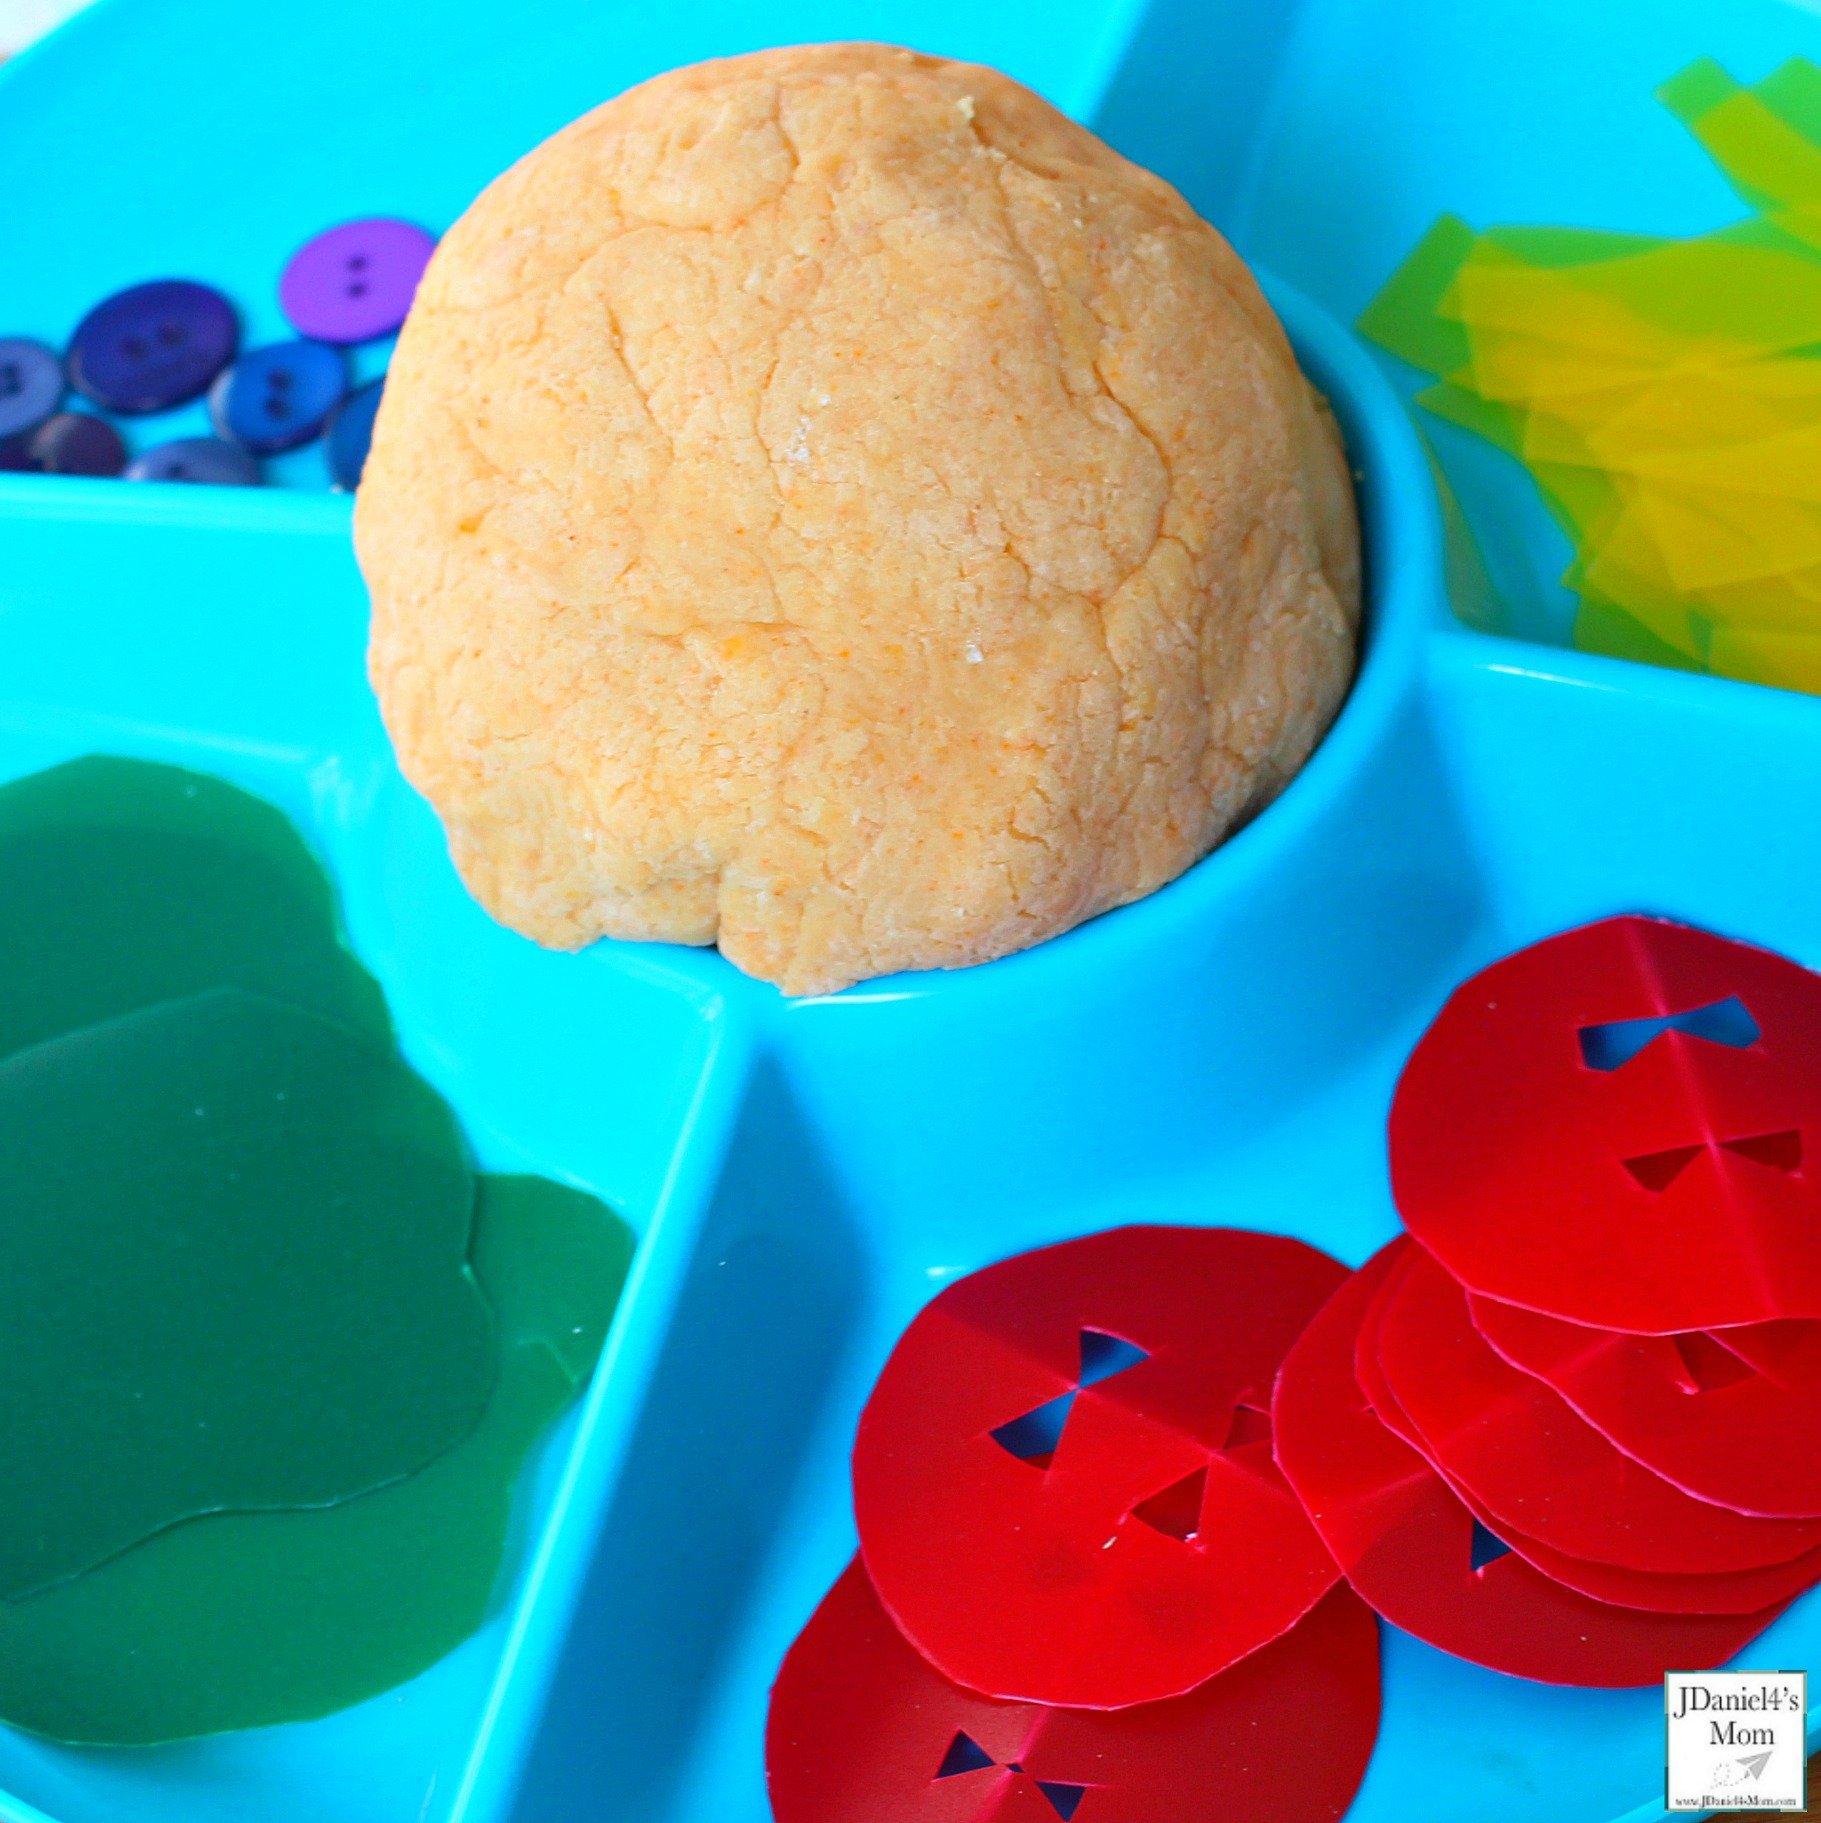 Dragons Love Tacos Themed Playdough Recipe and Activity - Children at home and students at school will have fun building dinosaurs sized tacos with taco scented playdough. This playdough recipe is so easy to make. This what the activity supplies look like in a tray.